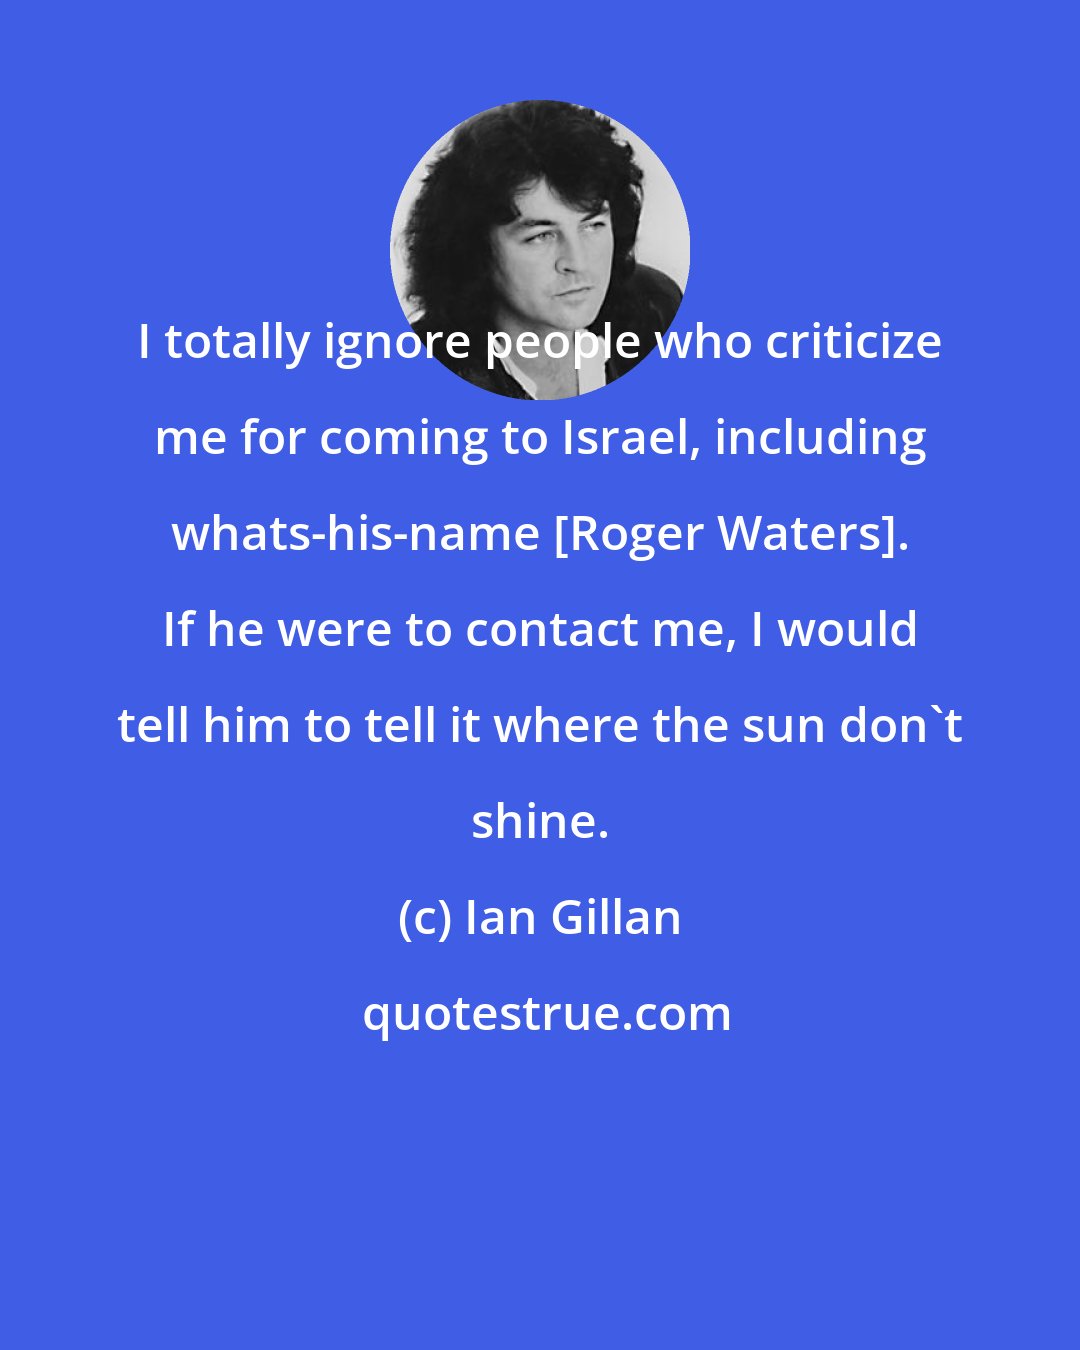 Ian Gillan: I totally ignore people who criticize me for coming to Israel, including whats-his-name [Roger Waters]. If he were to contact me, I would tell him to tell it where the sun don't shine.